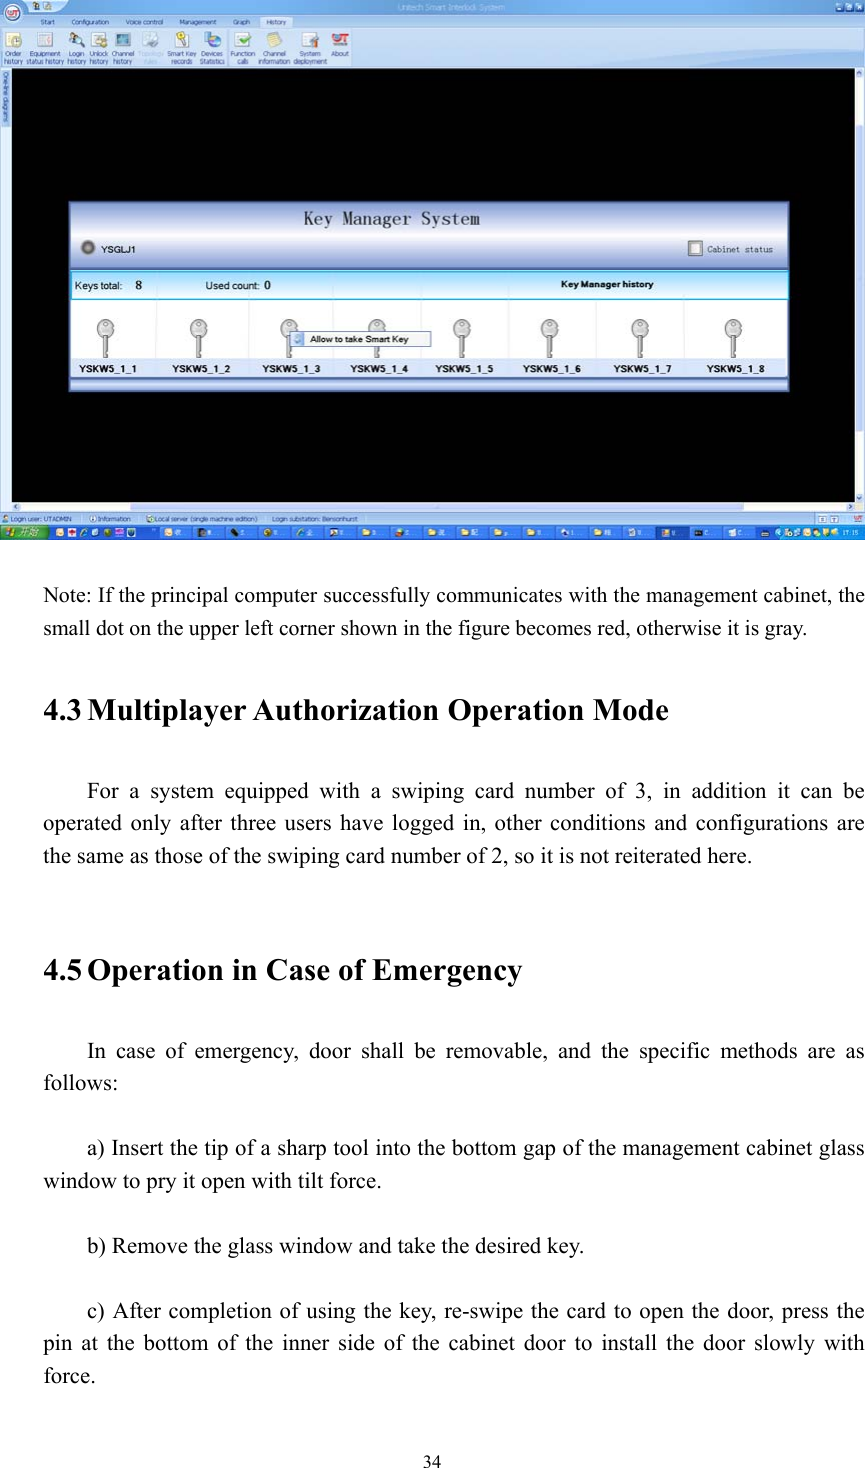 34    Note: If the principal computer successfully communicates with the management cabinet, the small dot on the upper left corner shown in the figure becomes red, otherwise it is gray.  4.3 Multiplayer Authorization  Operation Mode  For a system equipped with a swiping card number of 3, in addition it can be operated only after three users have logged in, other conditions and configurations are the same as those of the swiping card number of 2, so it is not reiterated here.   4.5 Operation in Case of Emergency  In case of emergency, door shall be removable, and the specific methods are as follows:  a) Insert the tip of a sharp tool into the bottom gap of the management cabinet glass window to pry it open with tilt force.  b) Remove the glass window and take the desired key.  c) After completion of using the key, re-swipe the card to open the door, press the pin at the bottom of the inner side of the cabinet door to install the door slowly with force.  